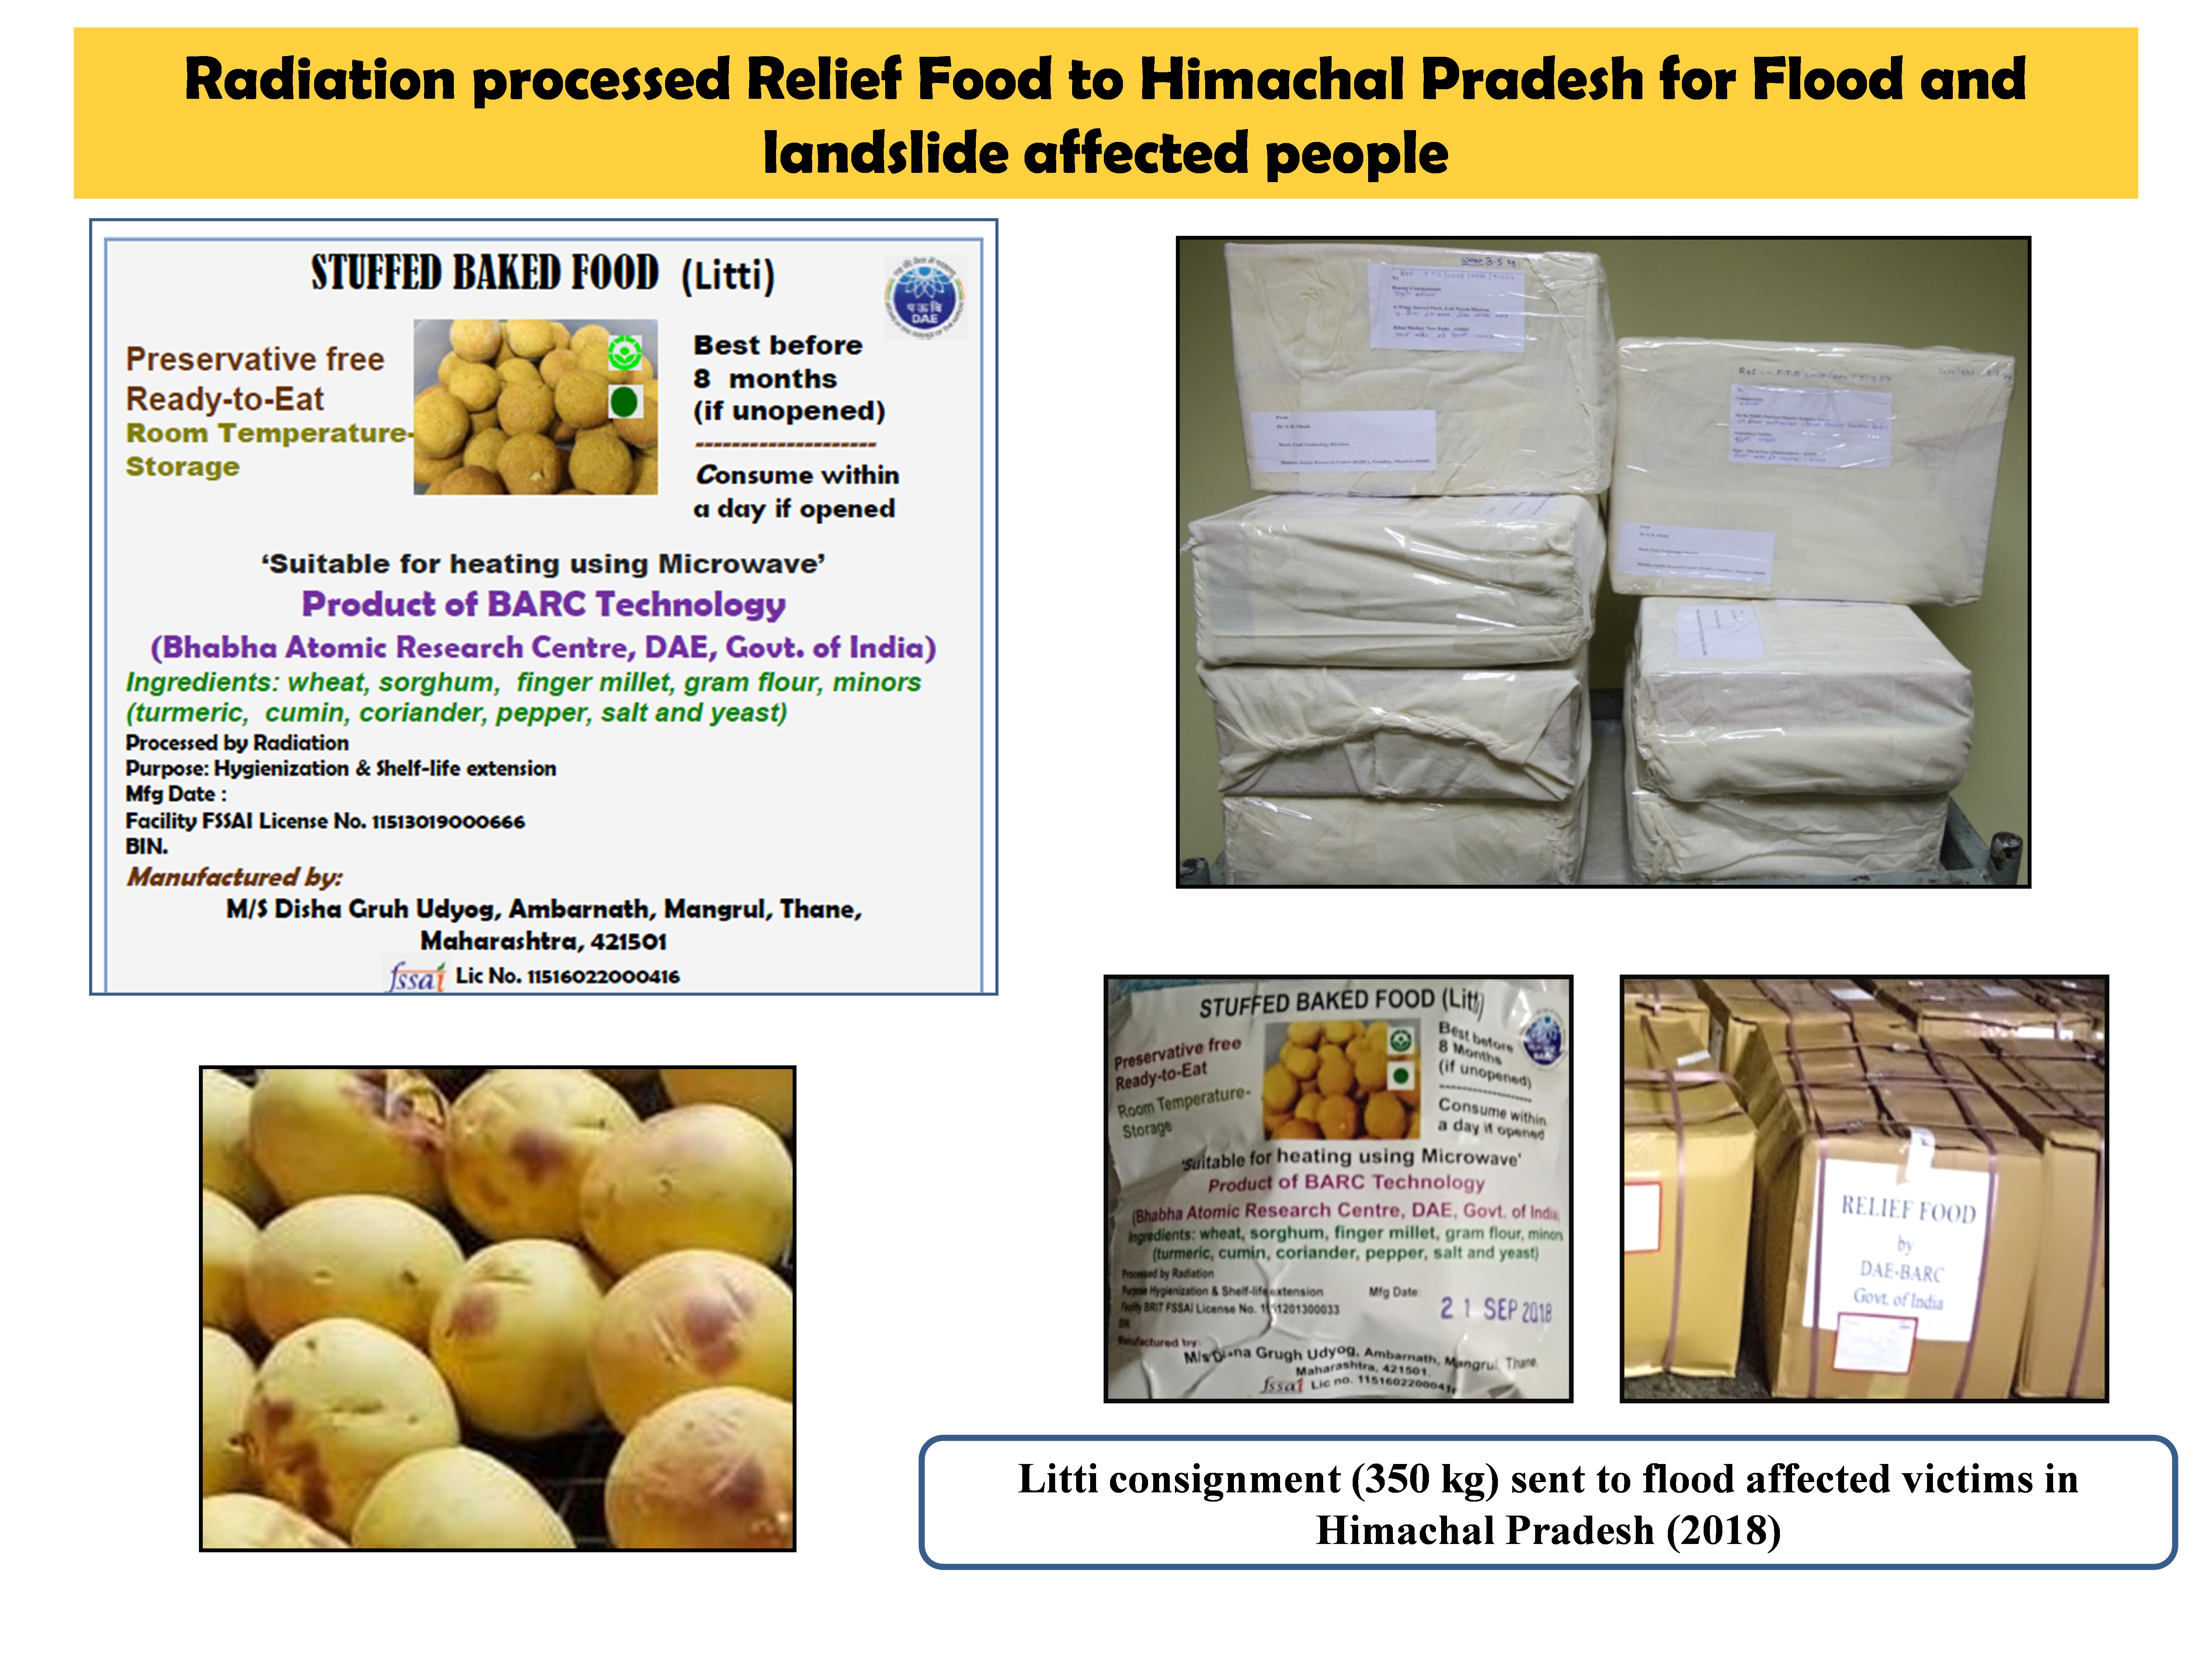 Radiation Processed Relief Food